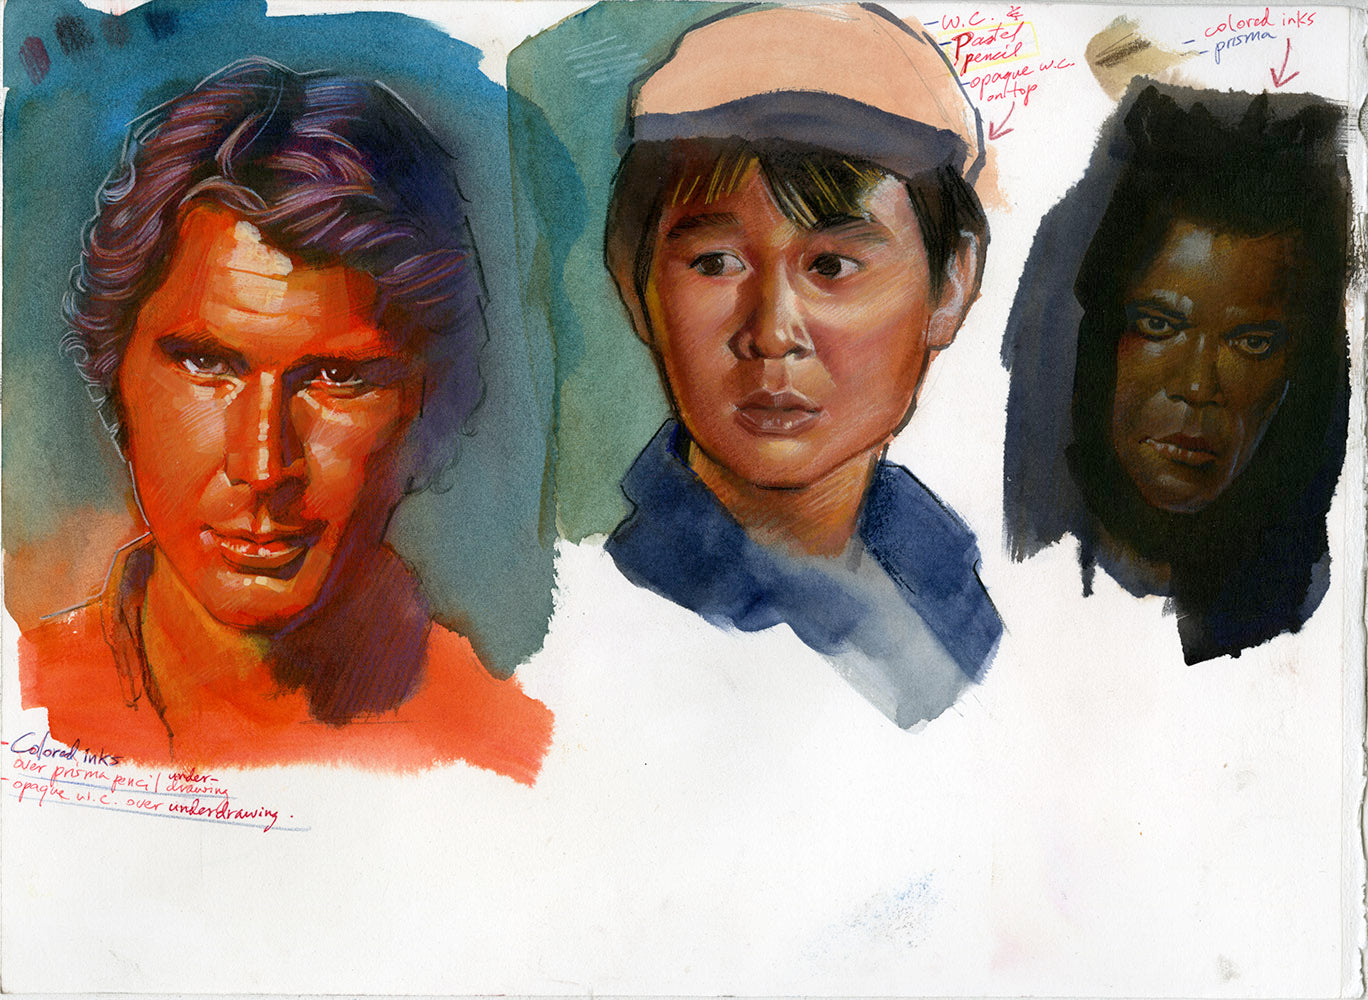 Harrison Ford study with others